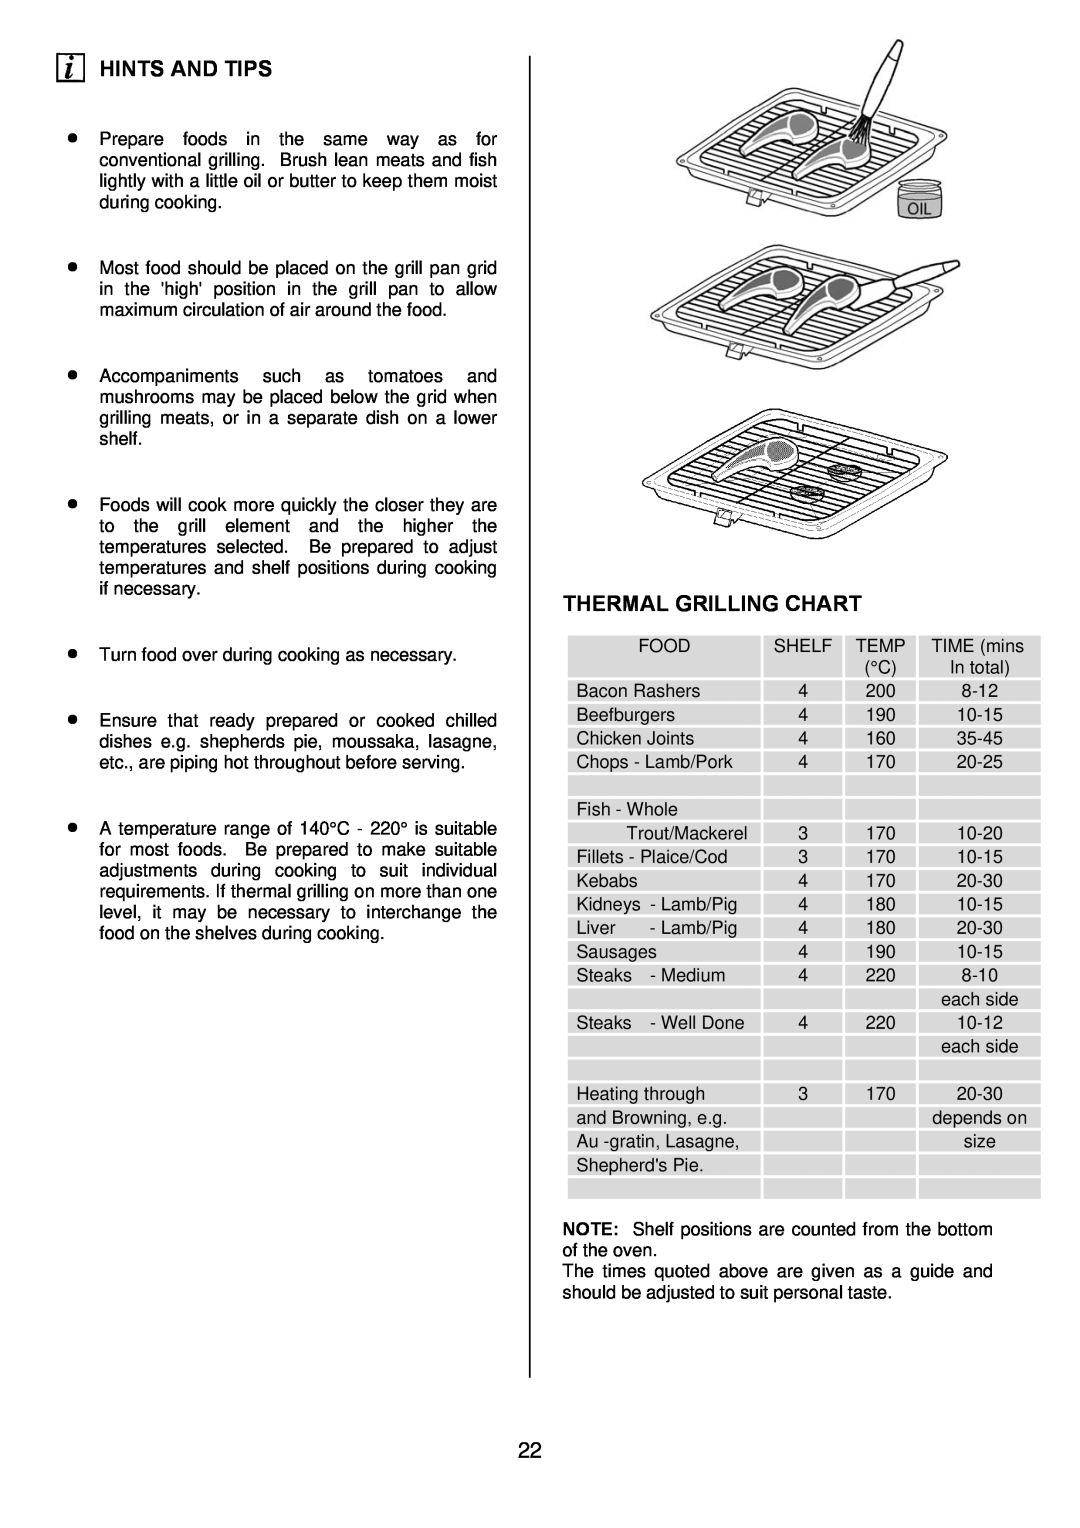 Zanussi ZOD 890 manual Thermal Grilling Chart, Hints And Tips 